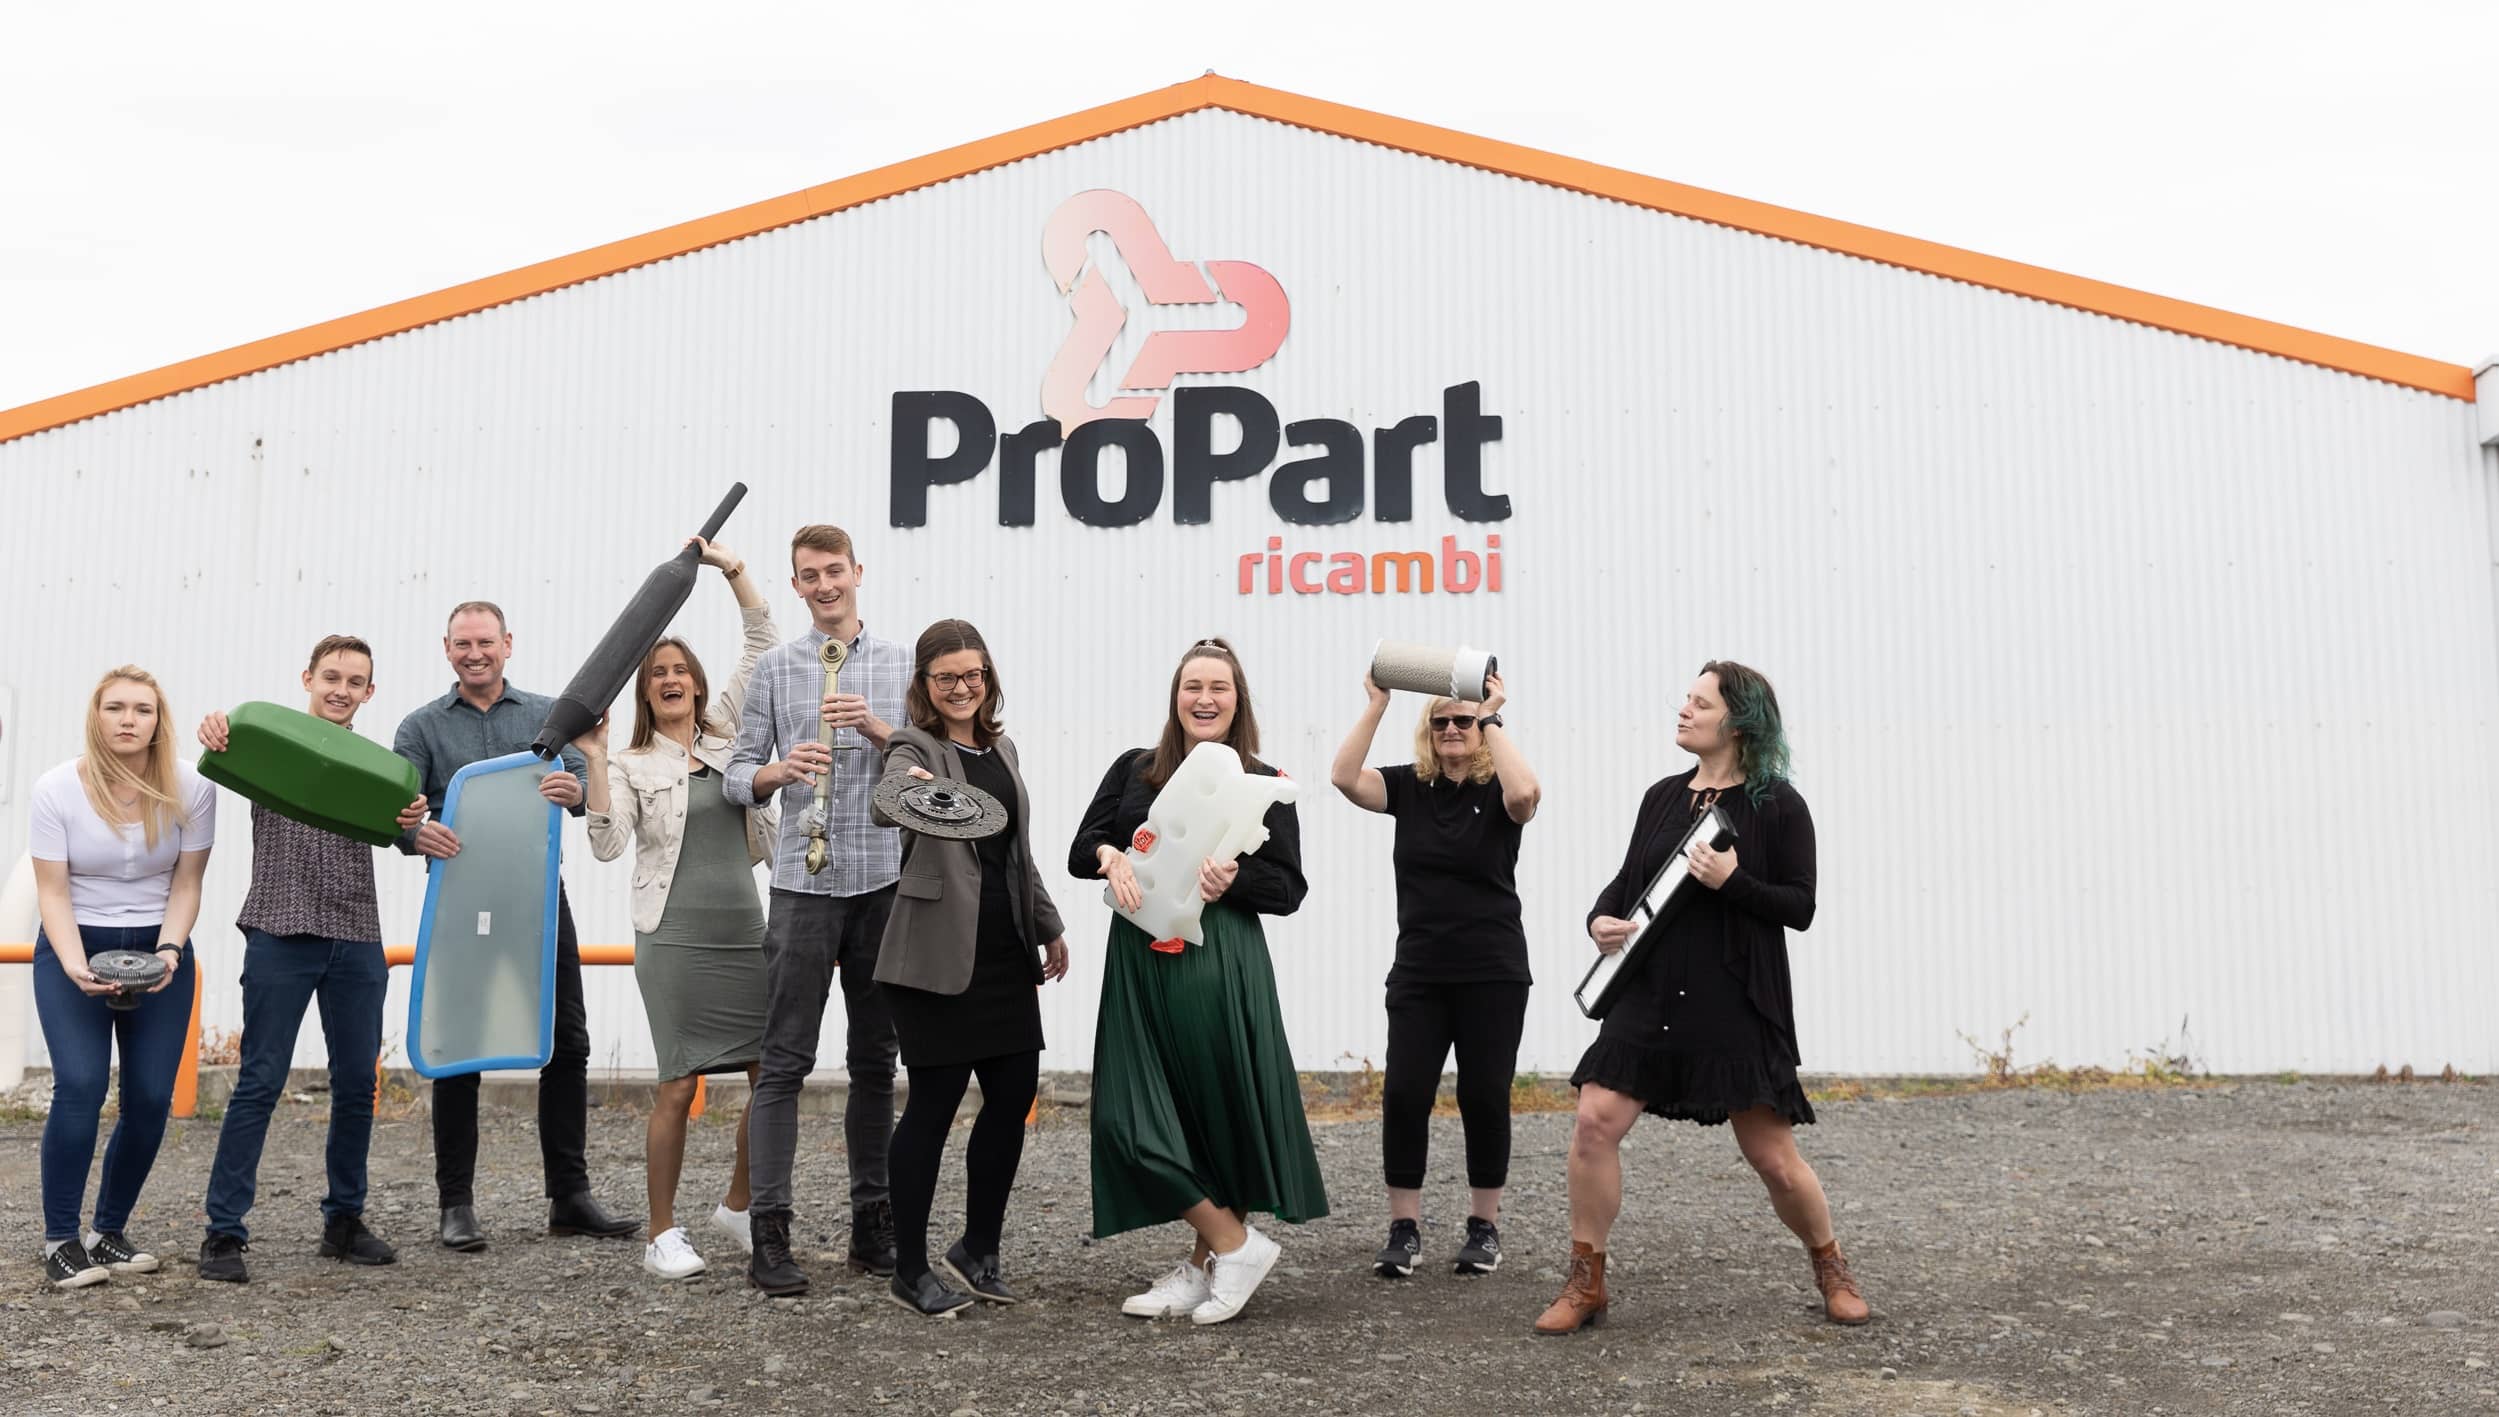 The ProPart team outside the building having fun with some tractor parts